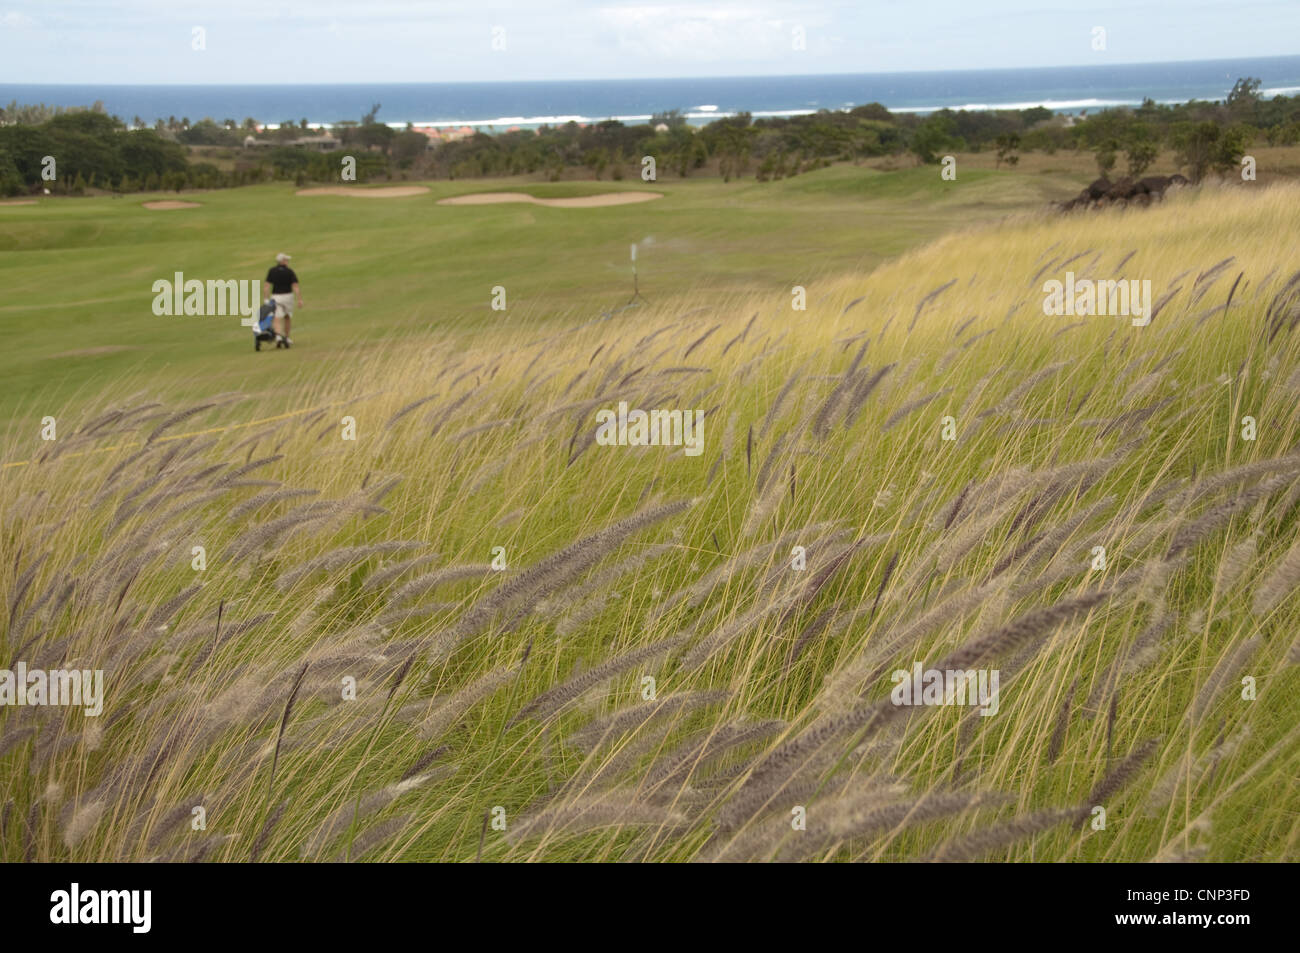 Grass growing rough golf course golfer pulling golf cart background Le Telfair Hotel Golf Course Bel Ombre Southwest Mauritius Stock Photo